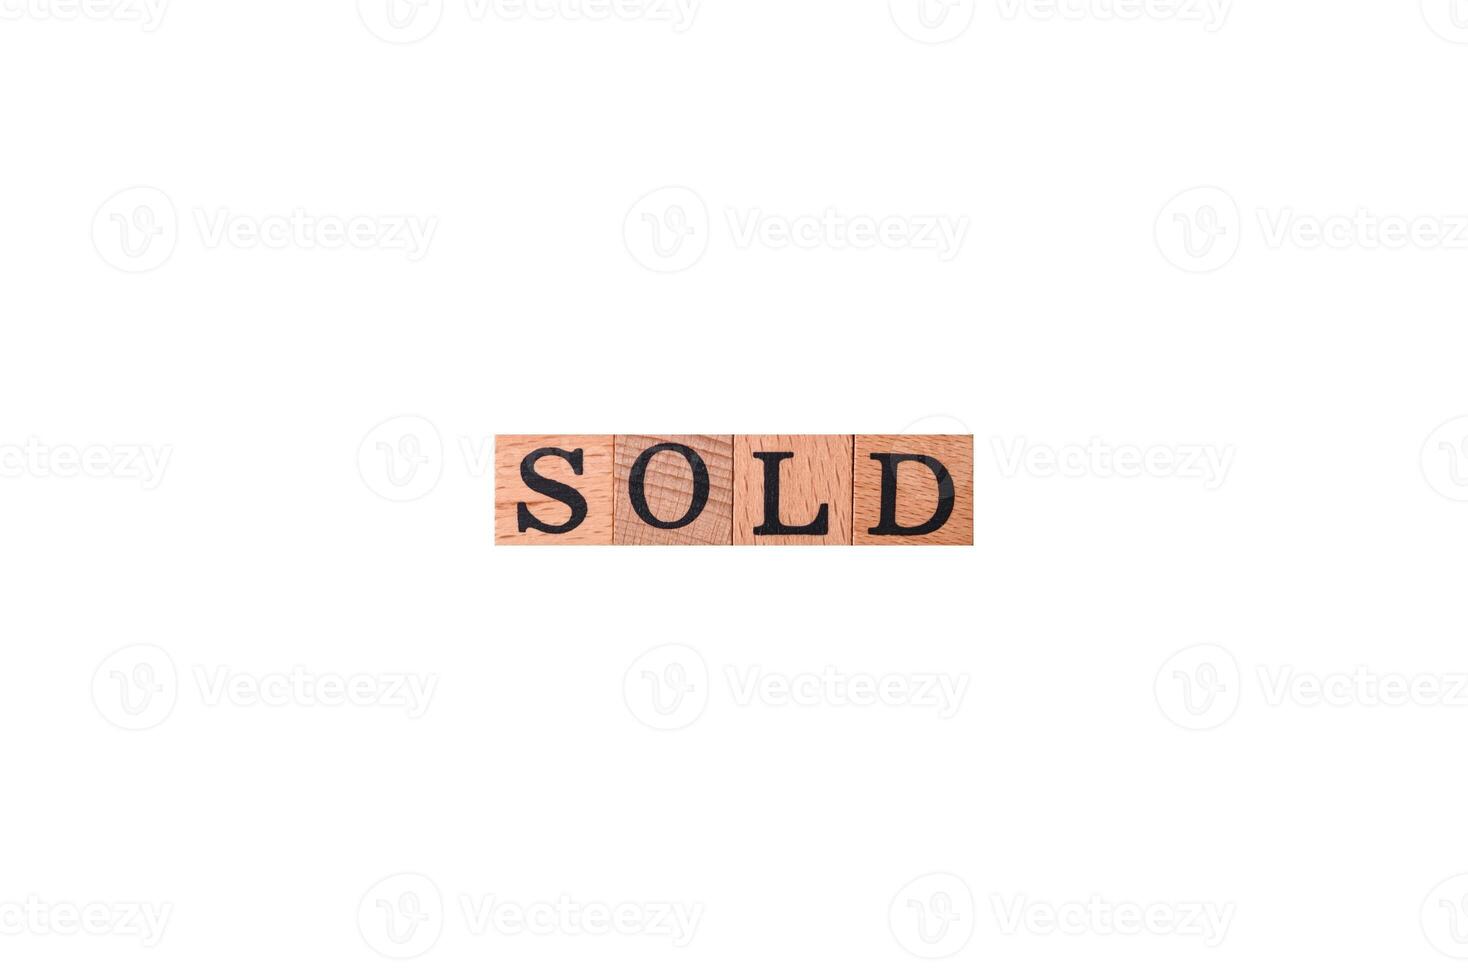 The inscription Sold made of wooden cubes on a plain background photo